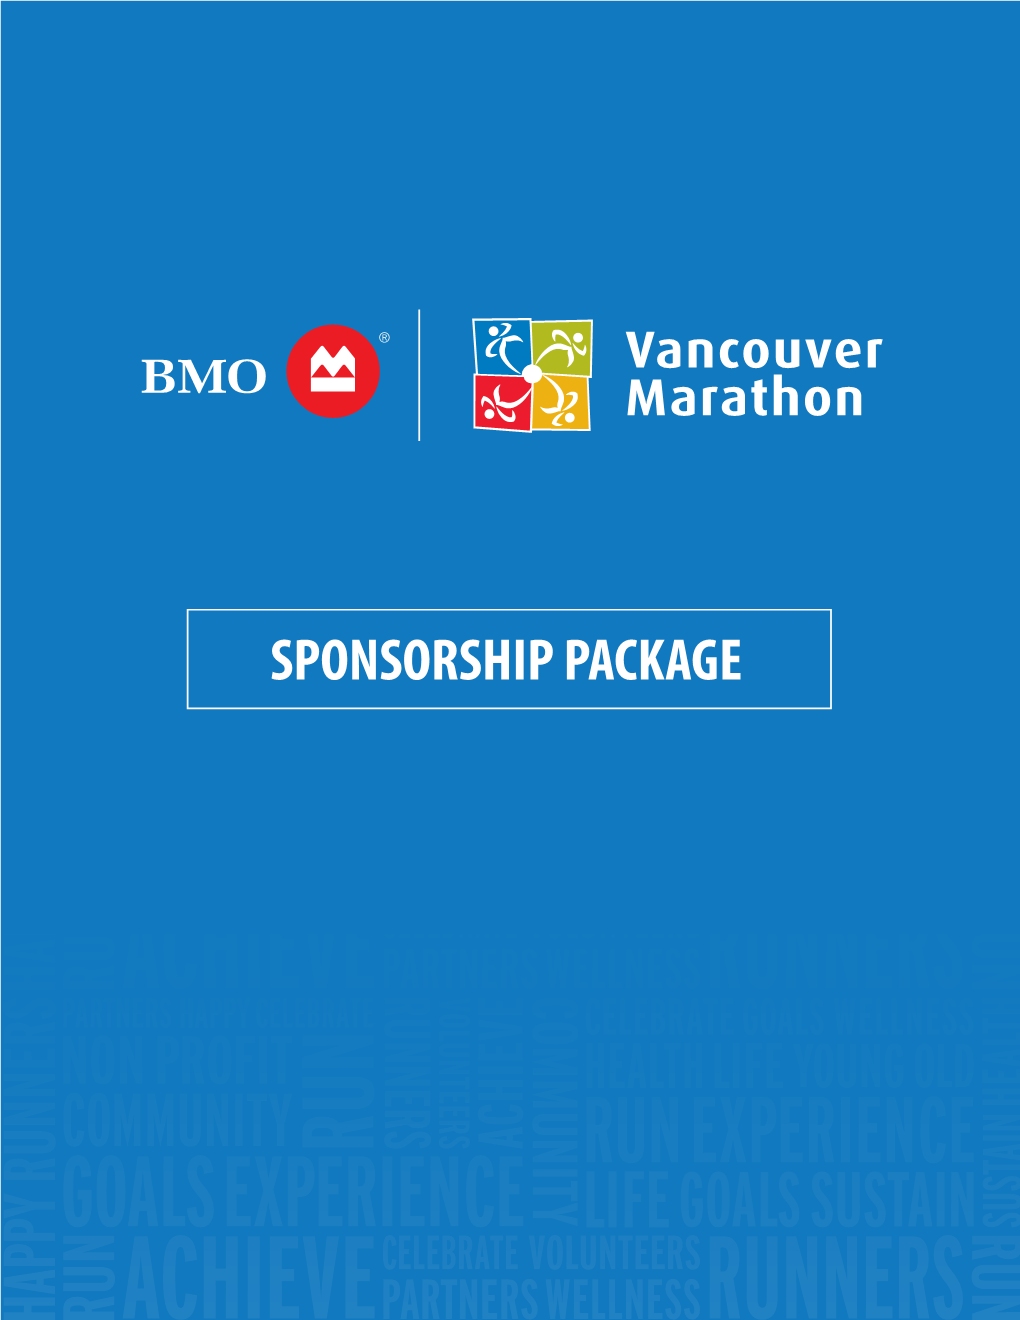 Sponsorship Package Overview